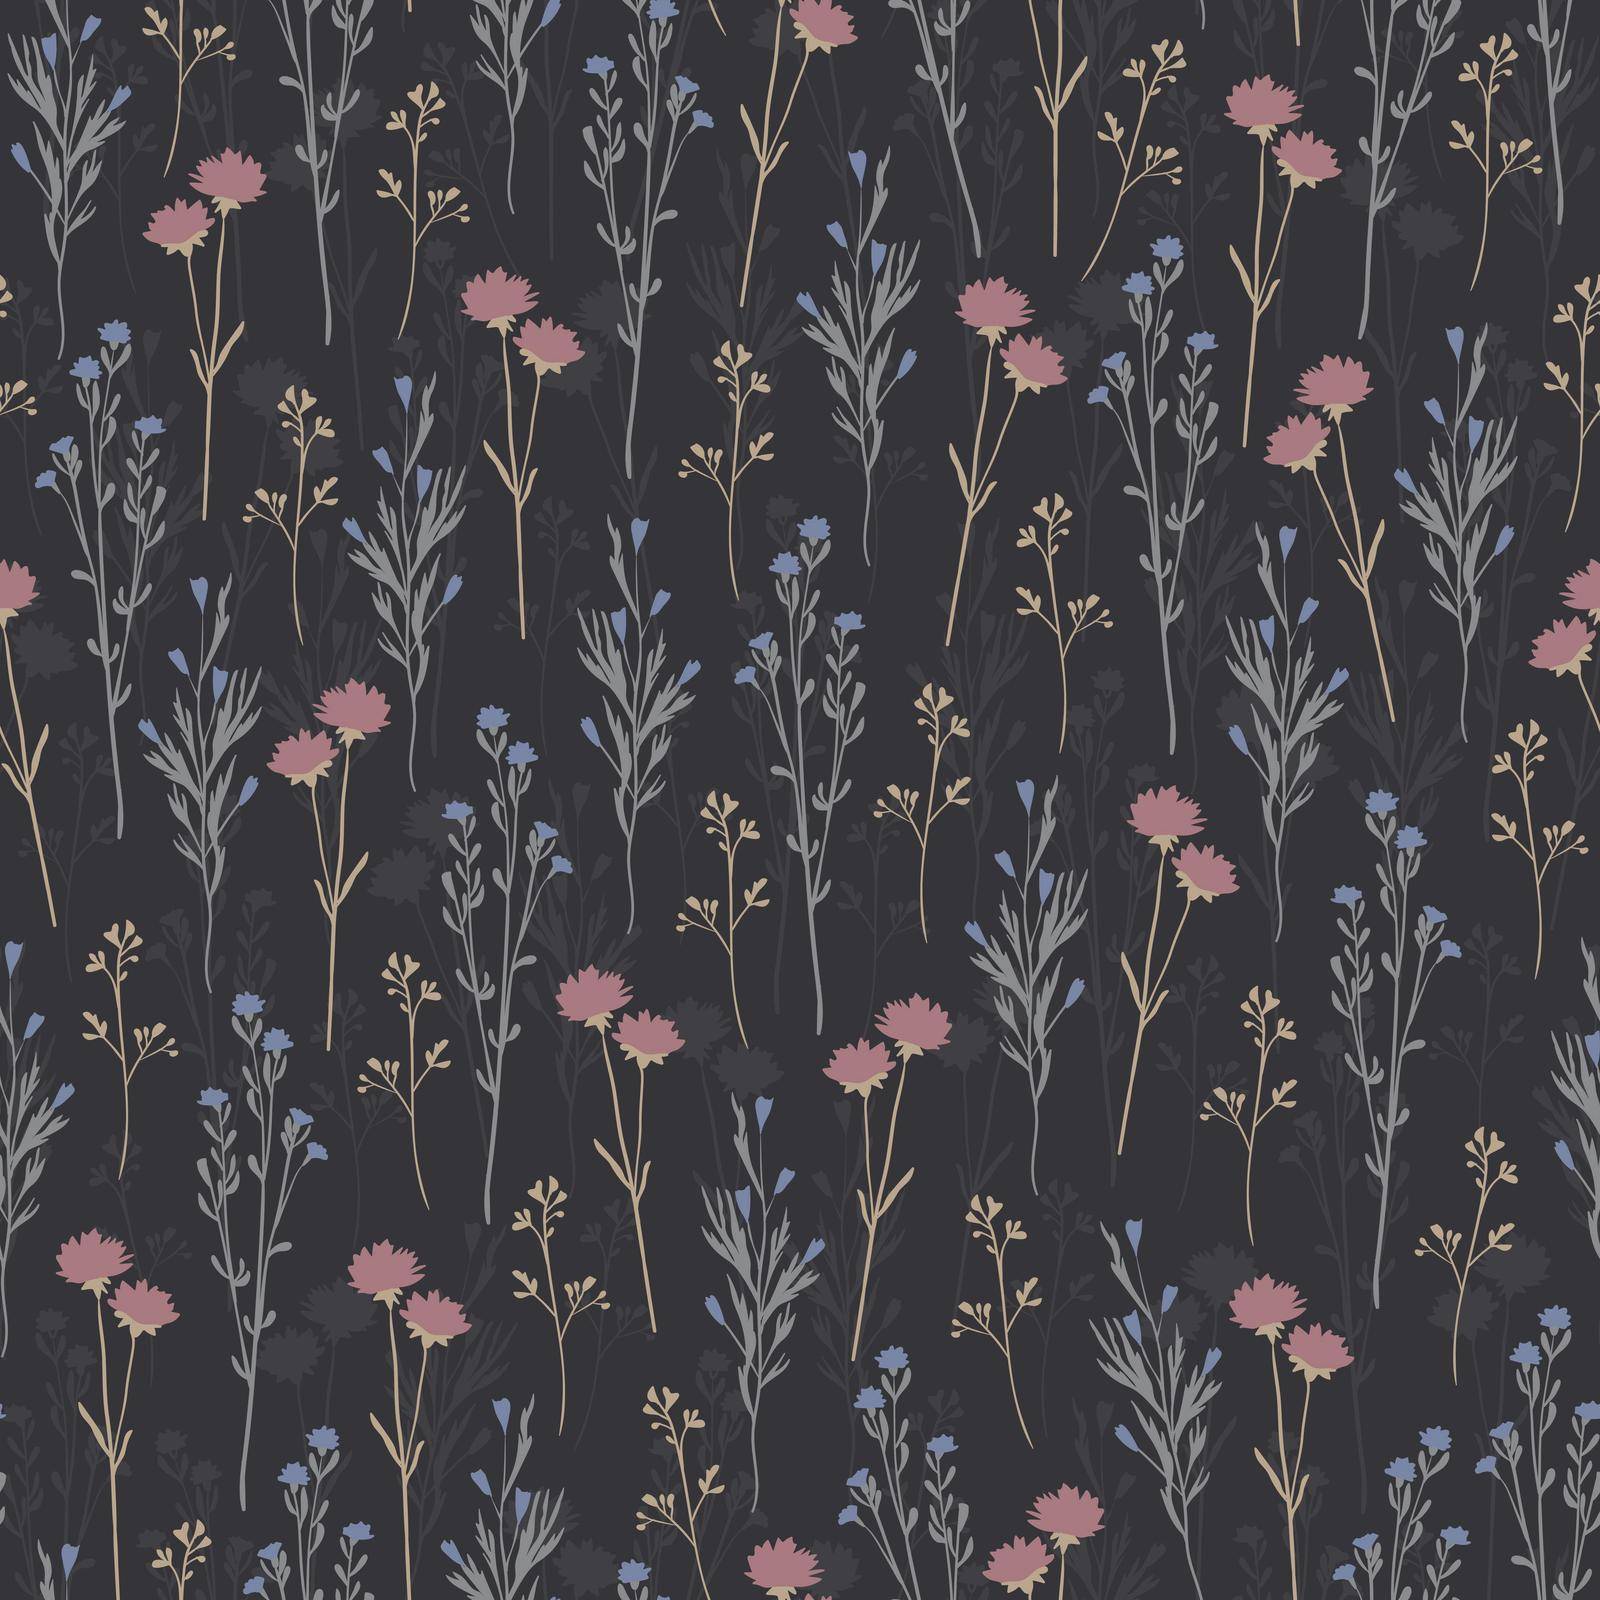 Seamless repeating pattern of flowers on black background